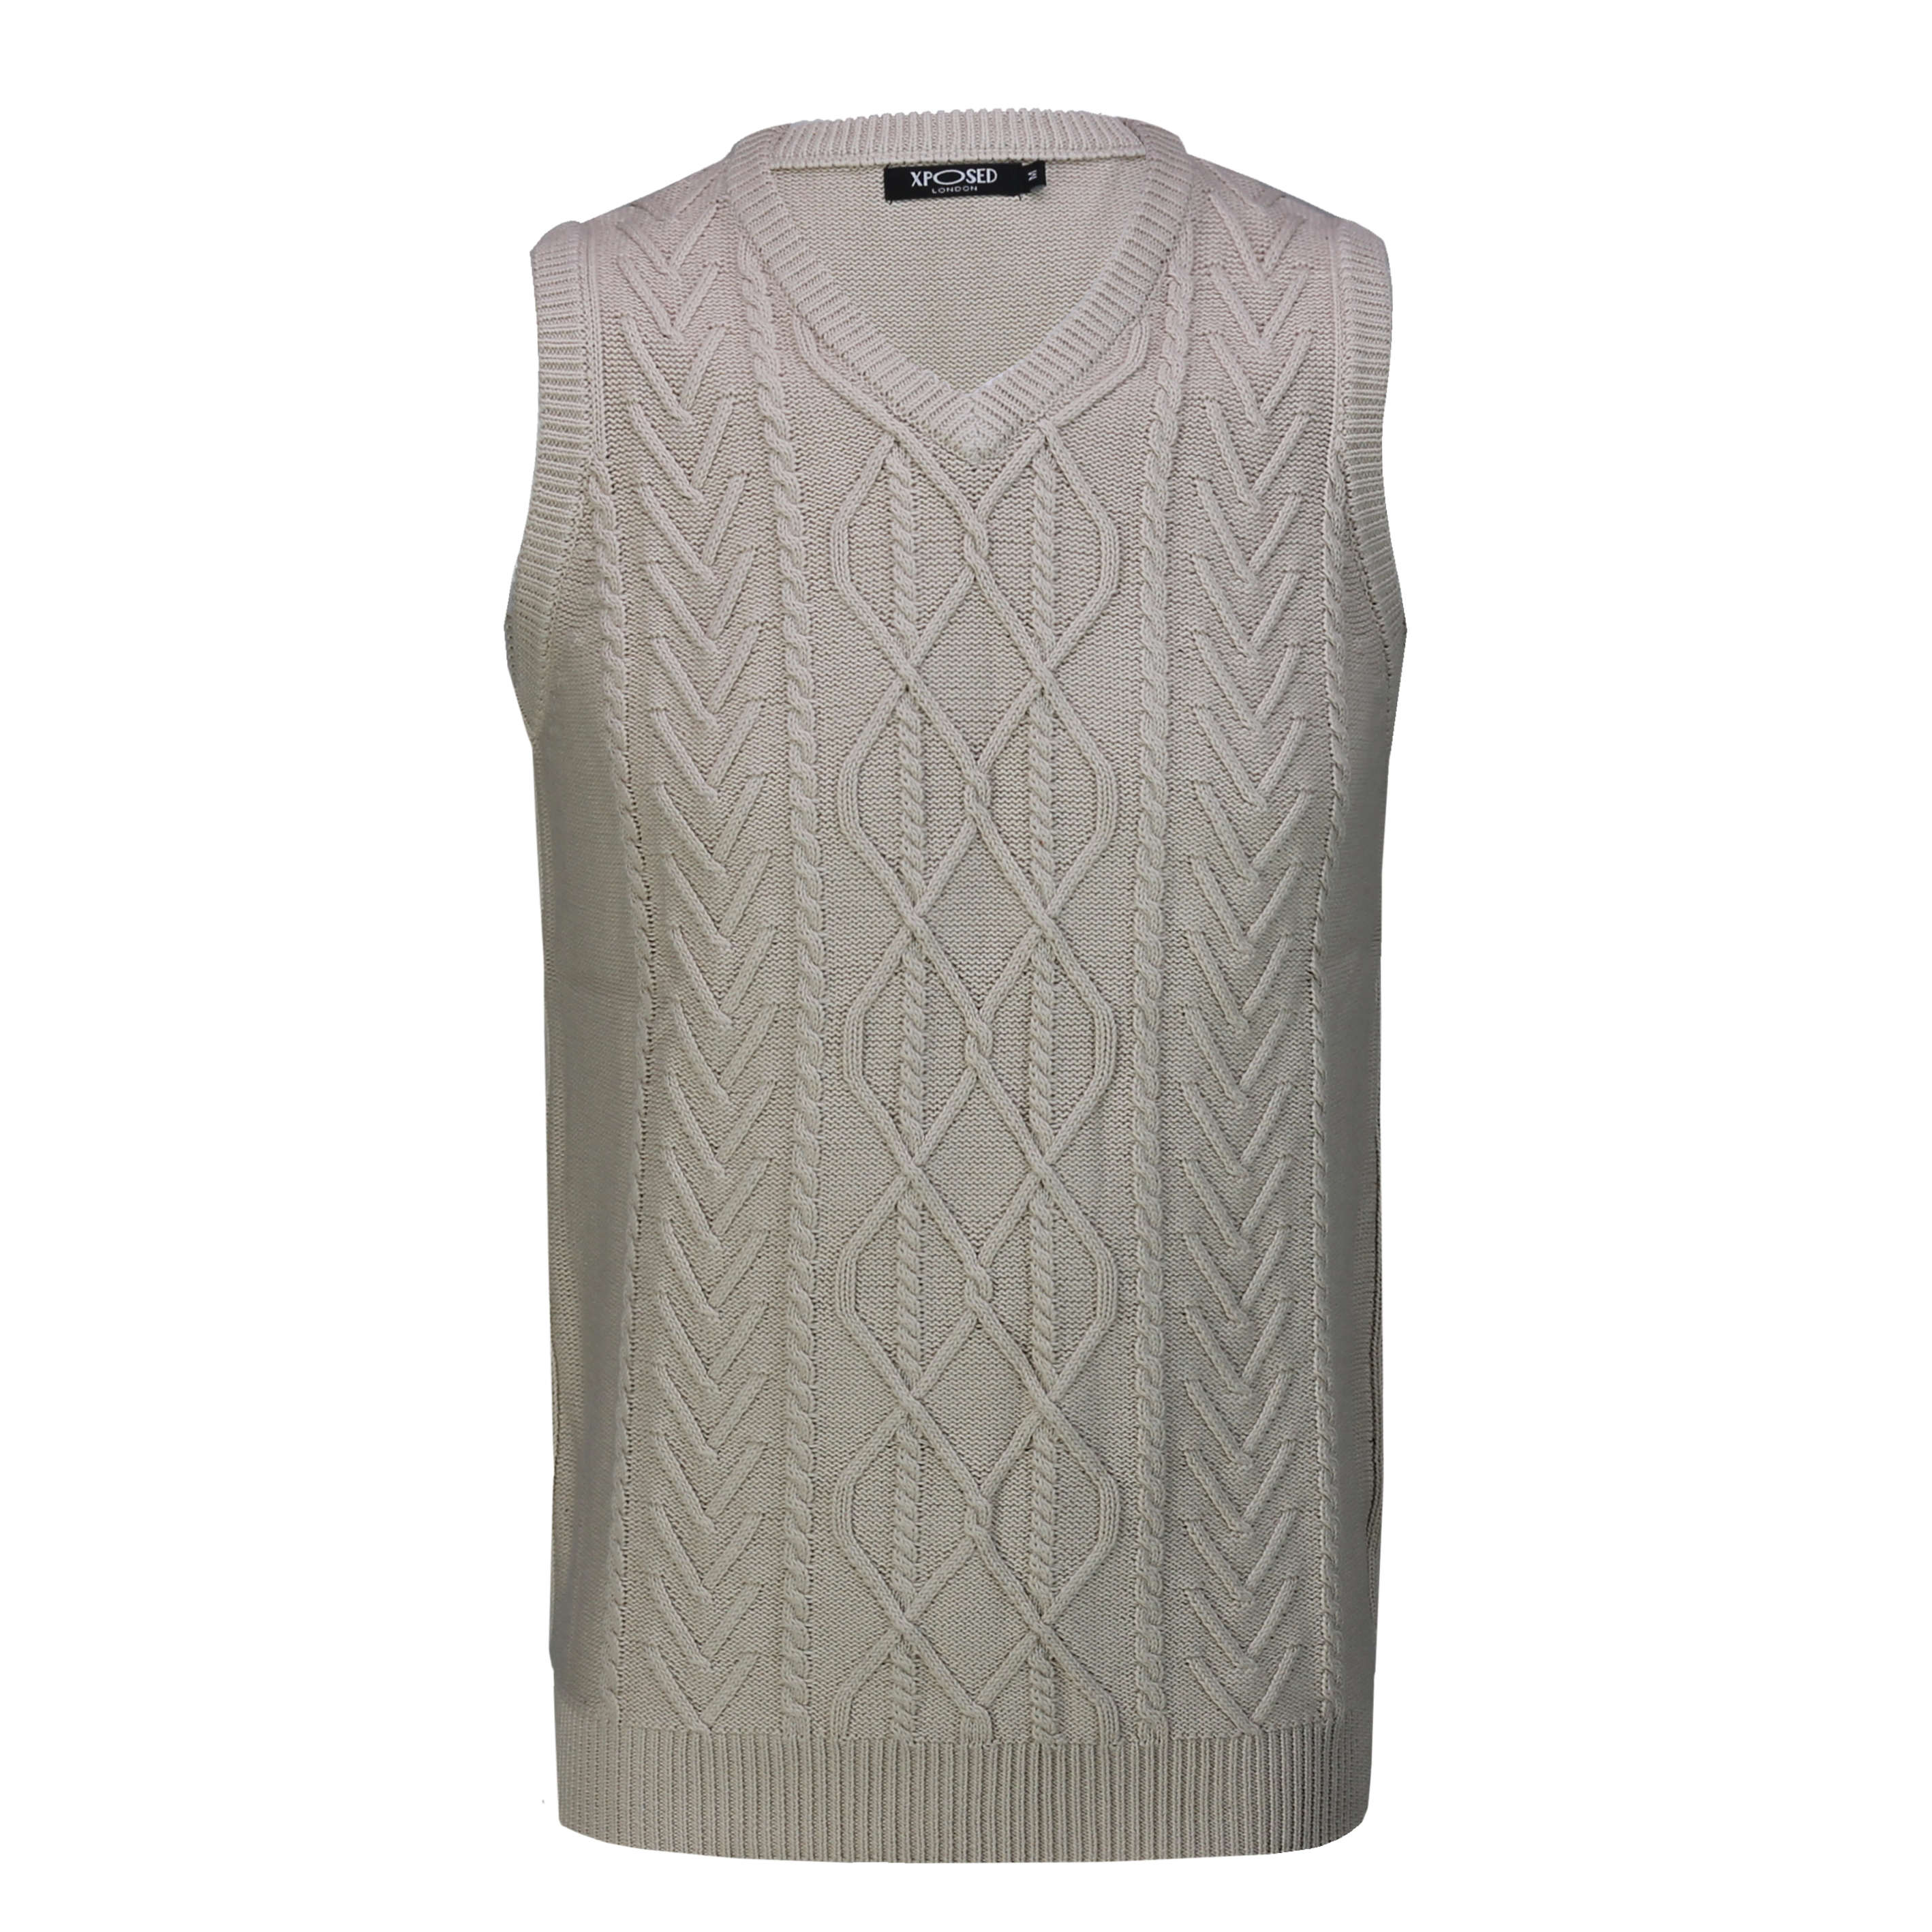 Classic Sleeveless V Neck Beige Jumper Cable Knitted